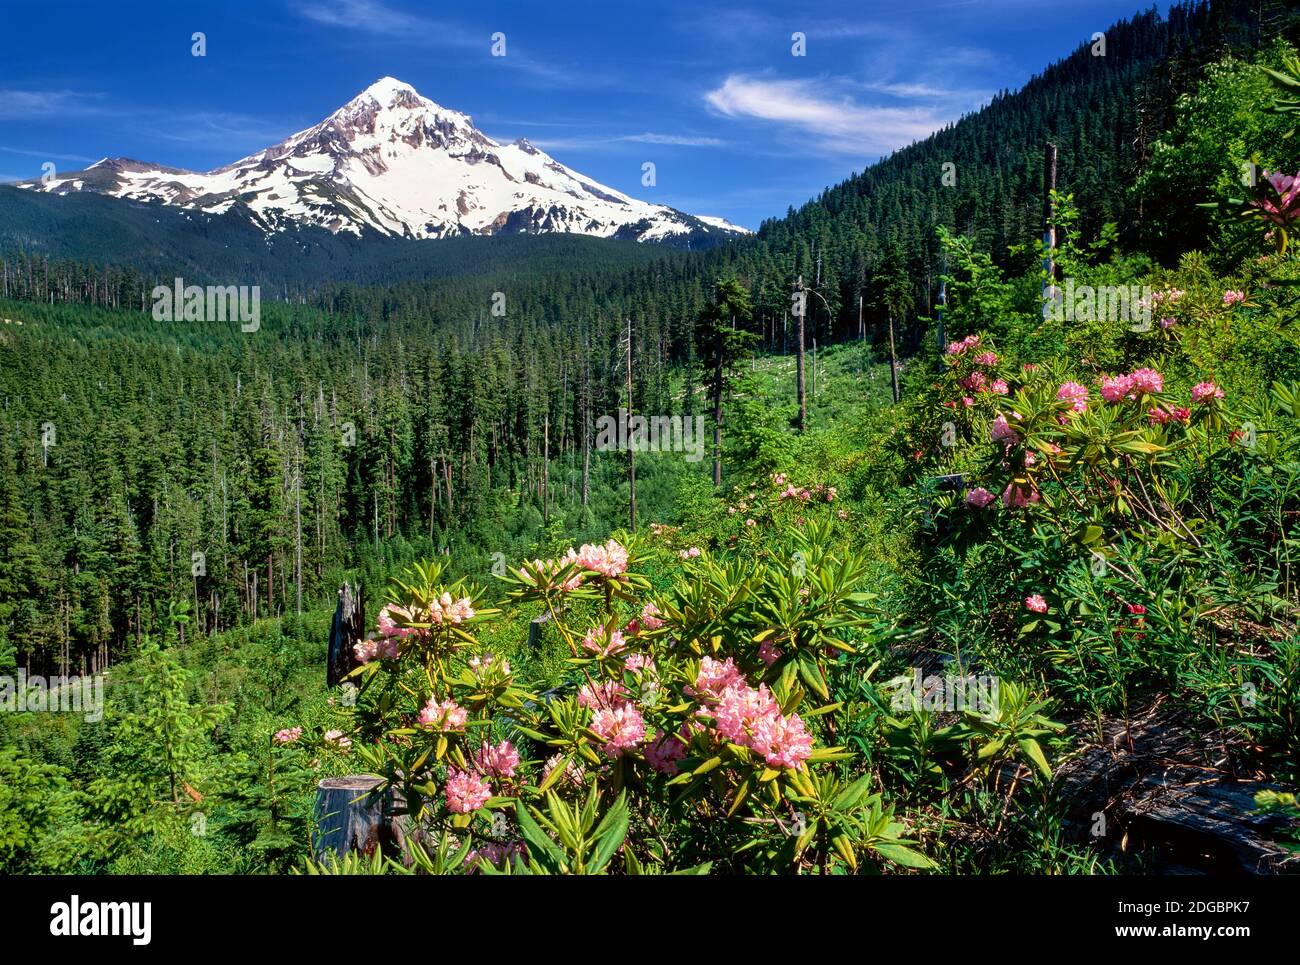 Rhodendron flowers blooming on plant with mountain range in the background, Mt Hood, Lolo Pass, Mt Hood National Forest, Oregon, USA Stock Photo